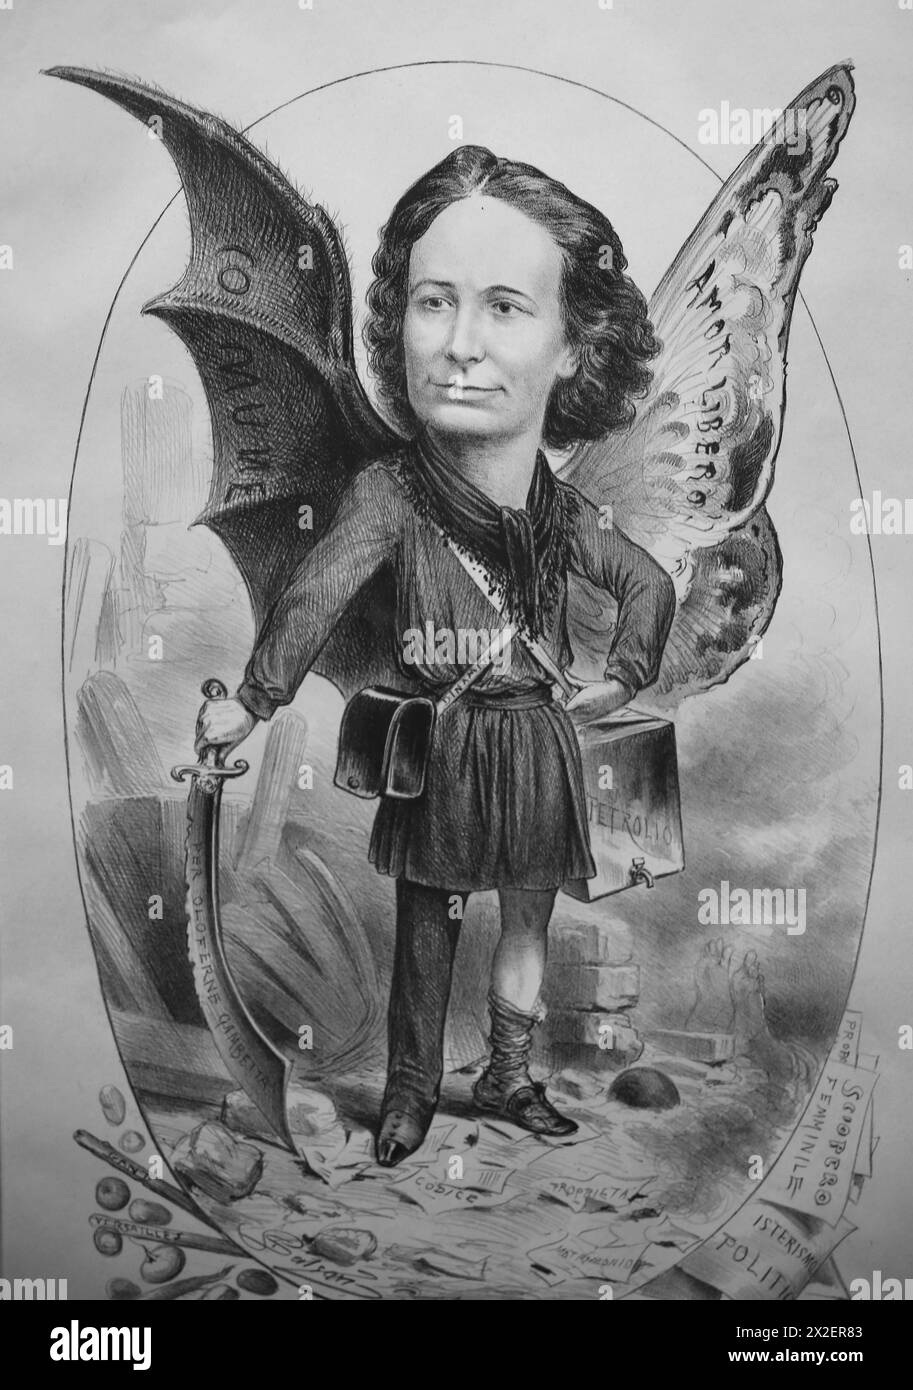 Political satire. The Paris Commune. Caricature of Louise Michel (1830-1905), heroine of the Commune. Lithography by Dalsani. 19th century. Stock Photo